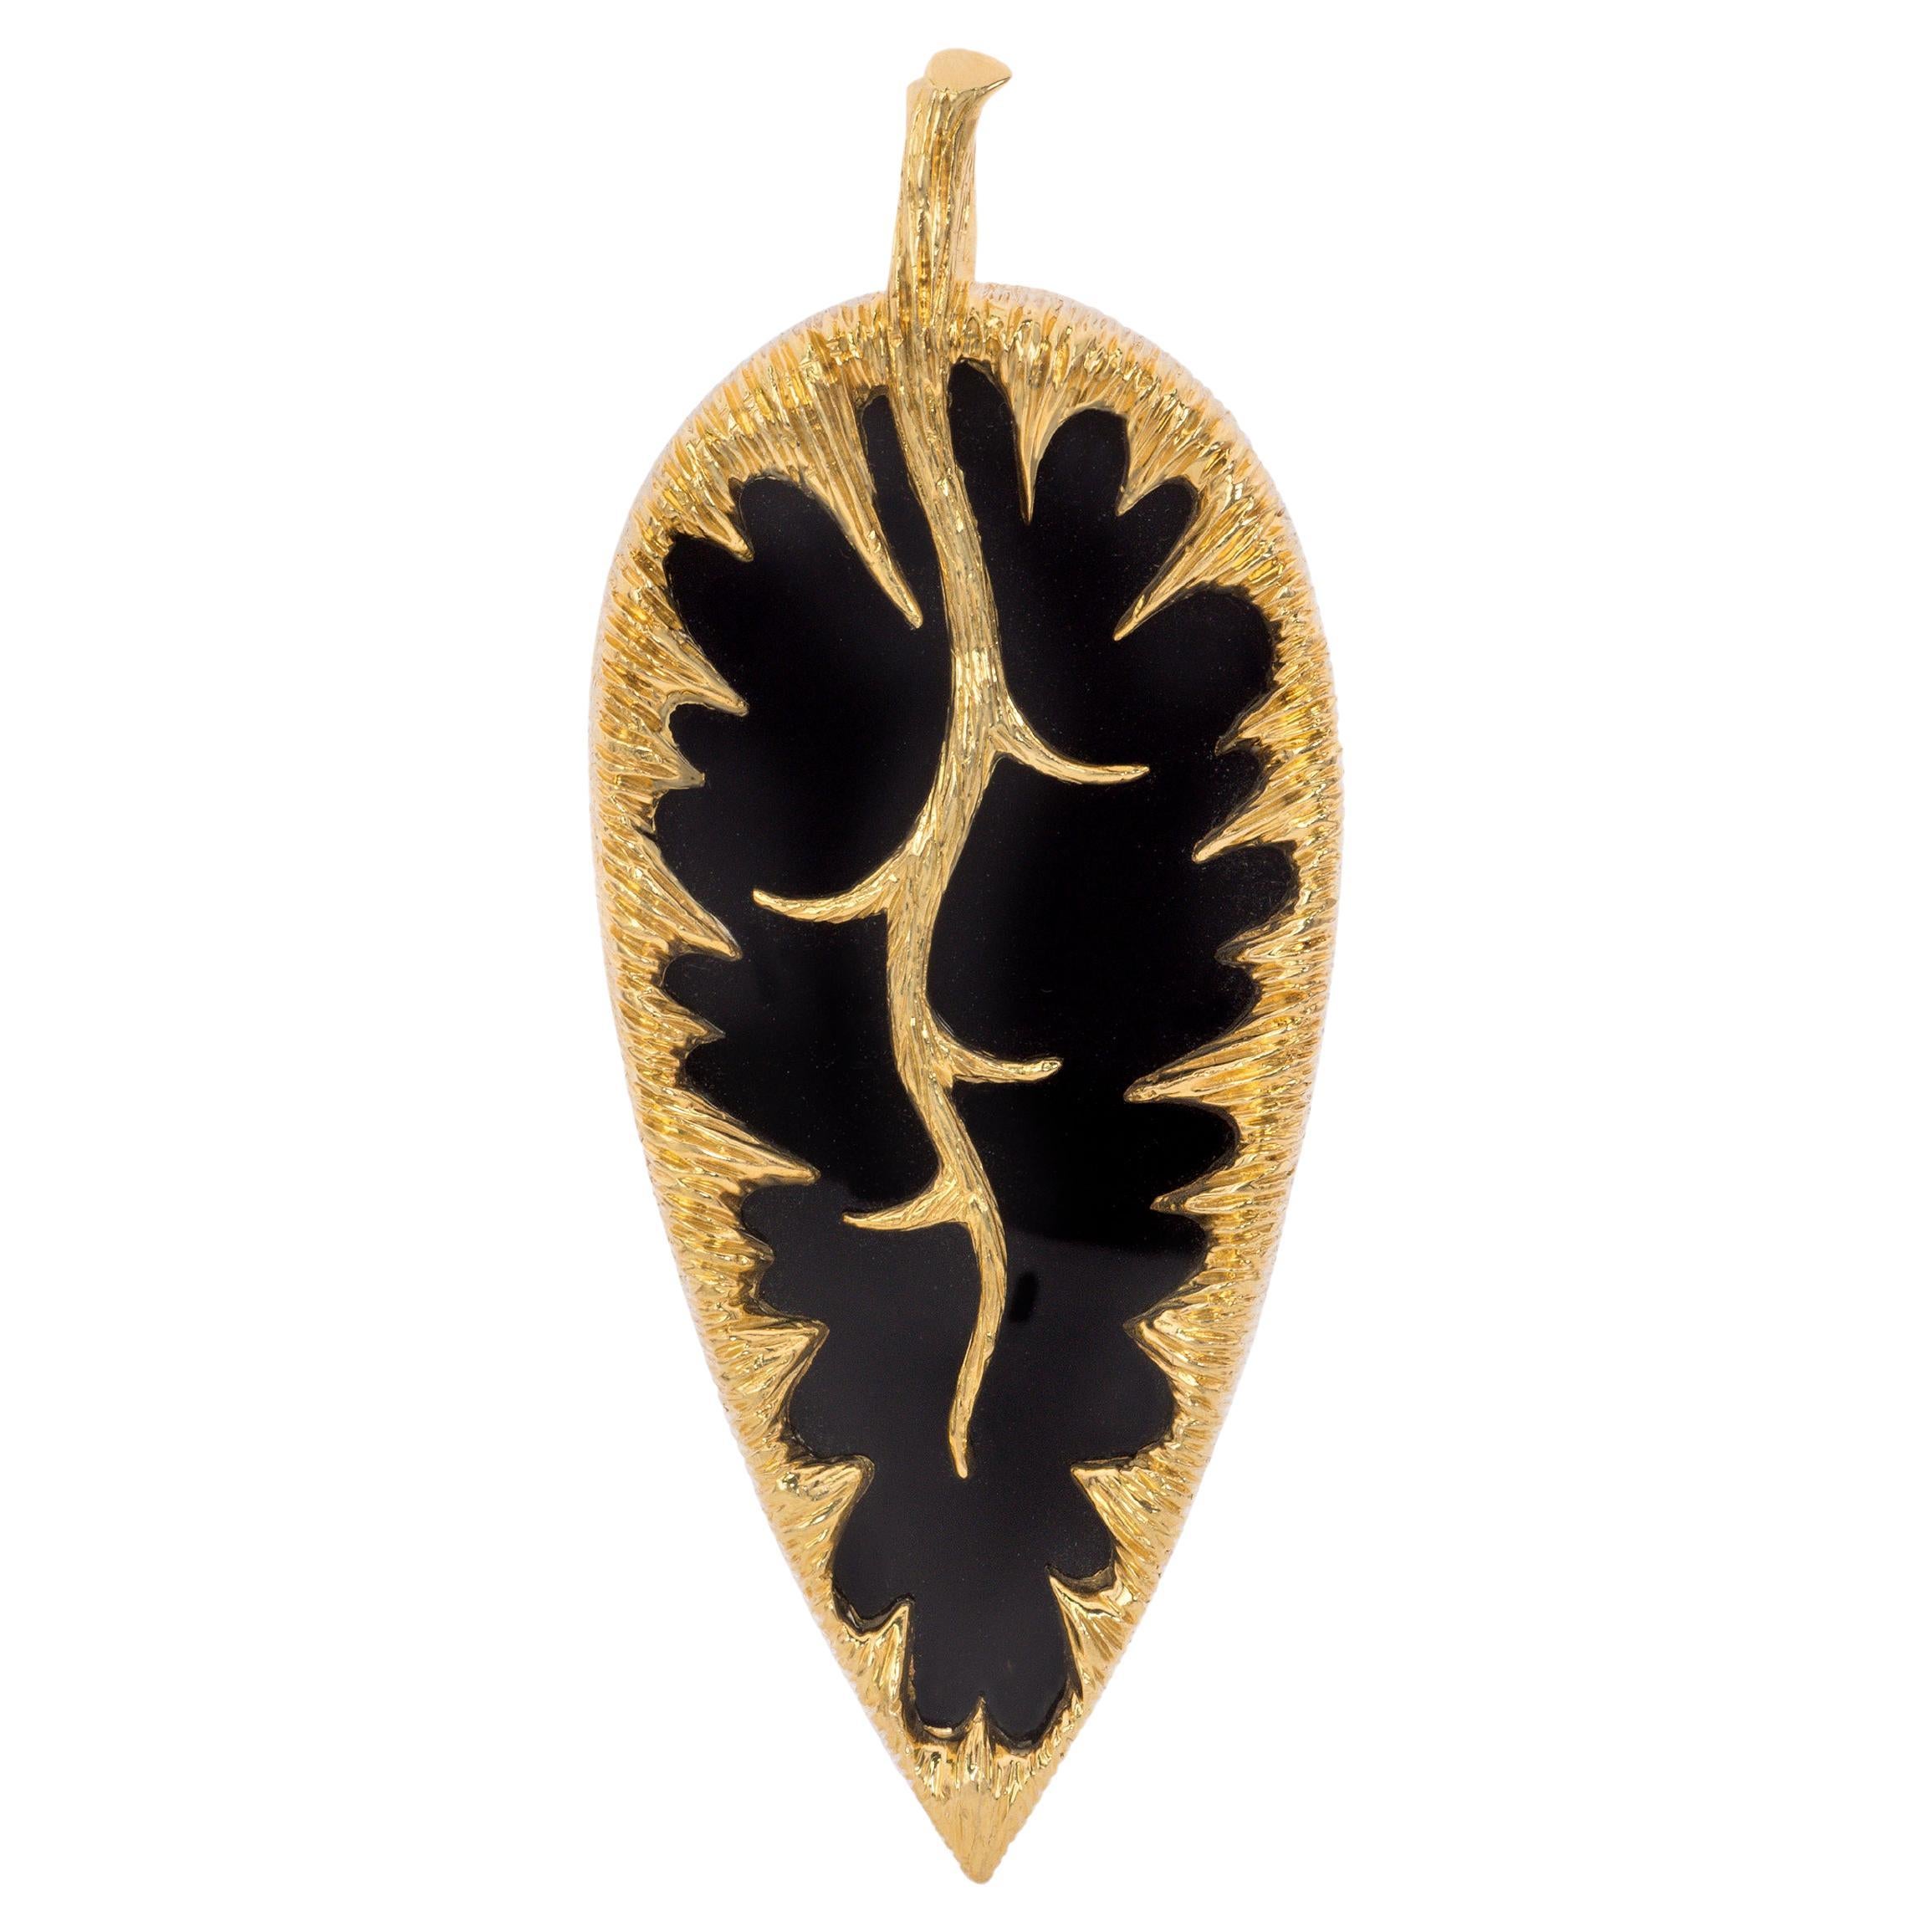 Kutchinsky Onyx and Textured Gold Pendant 1973 For Sale